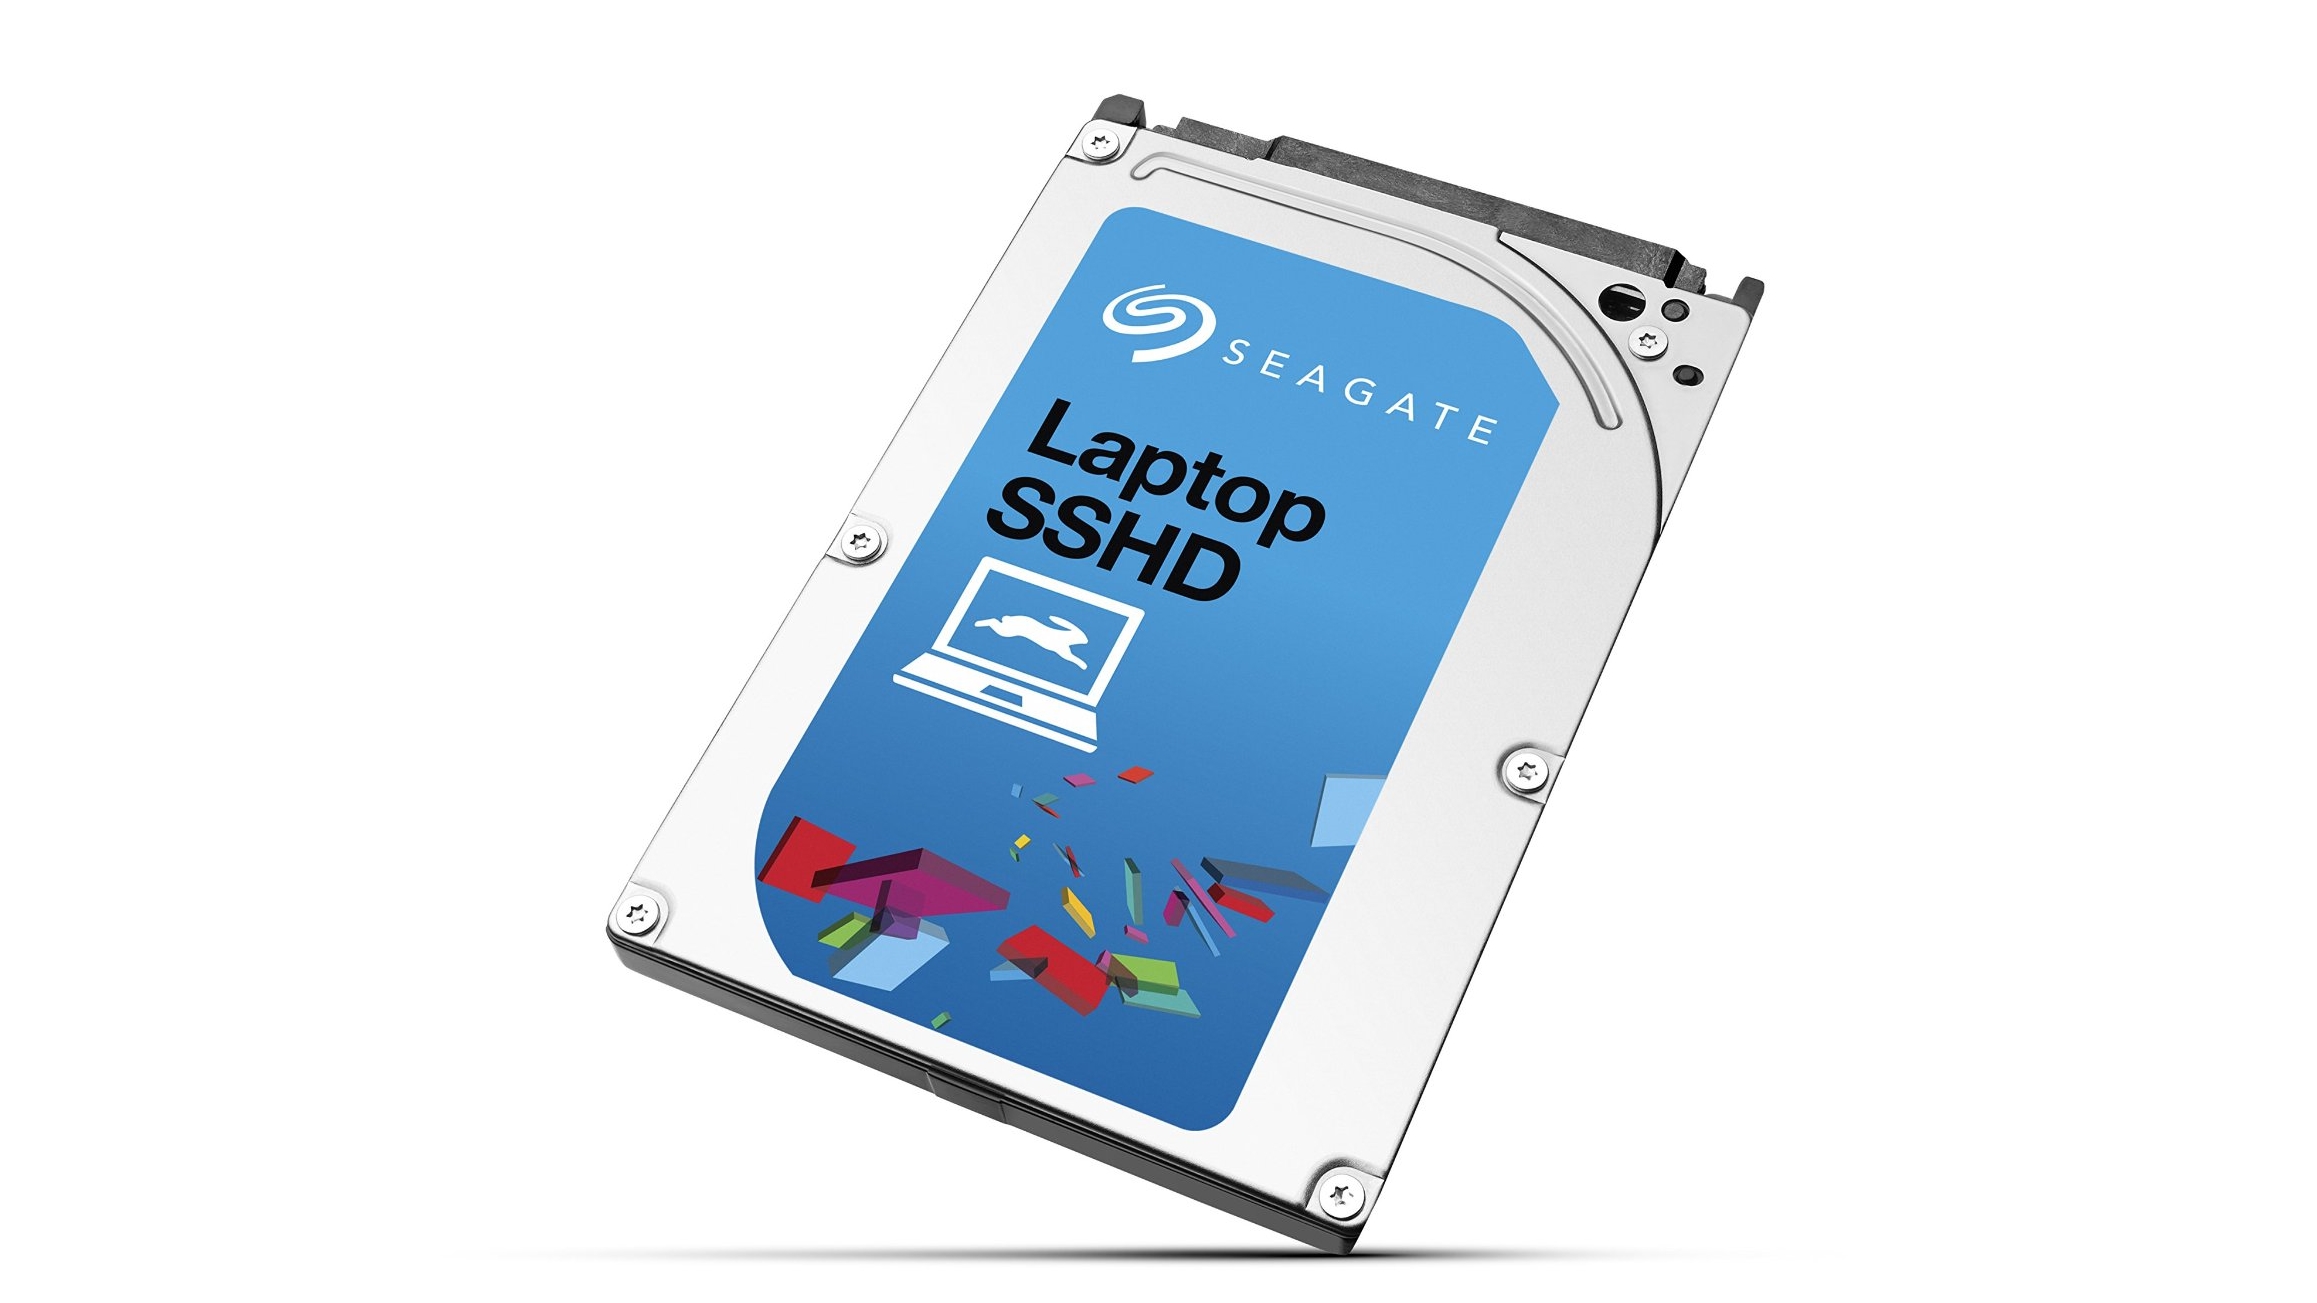 SSHDs combine the best of SSDs and HDDs. Image credit: Seagate